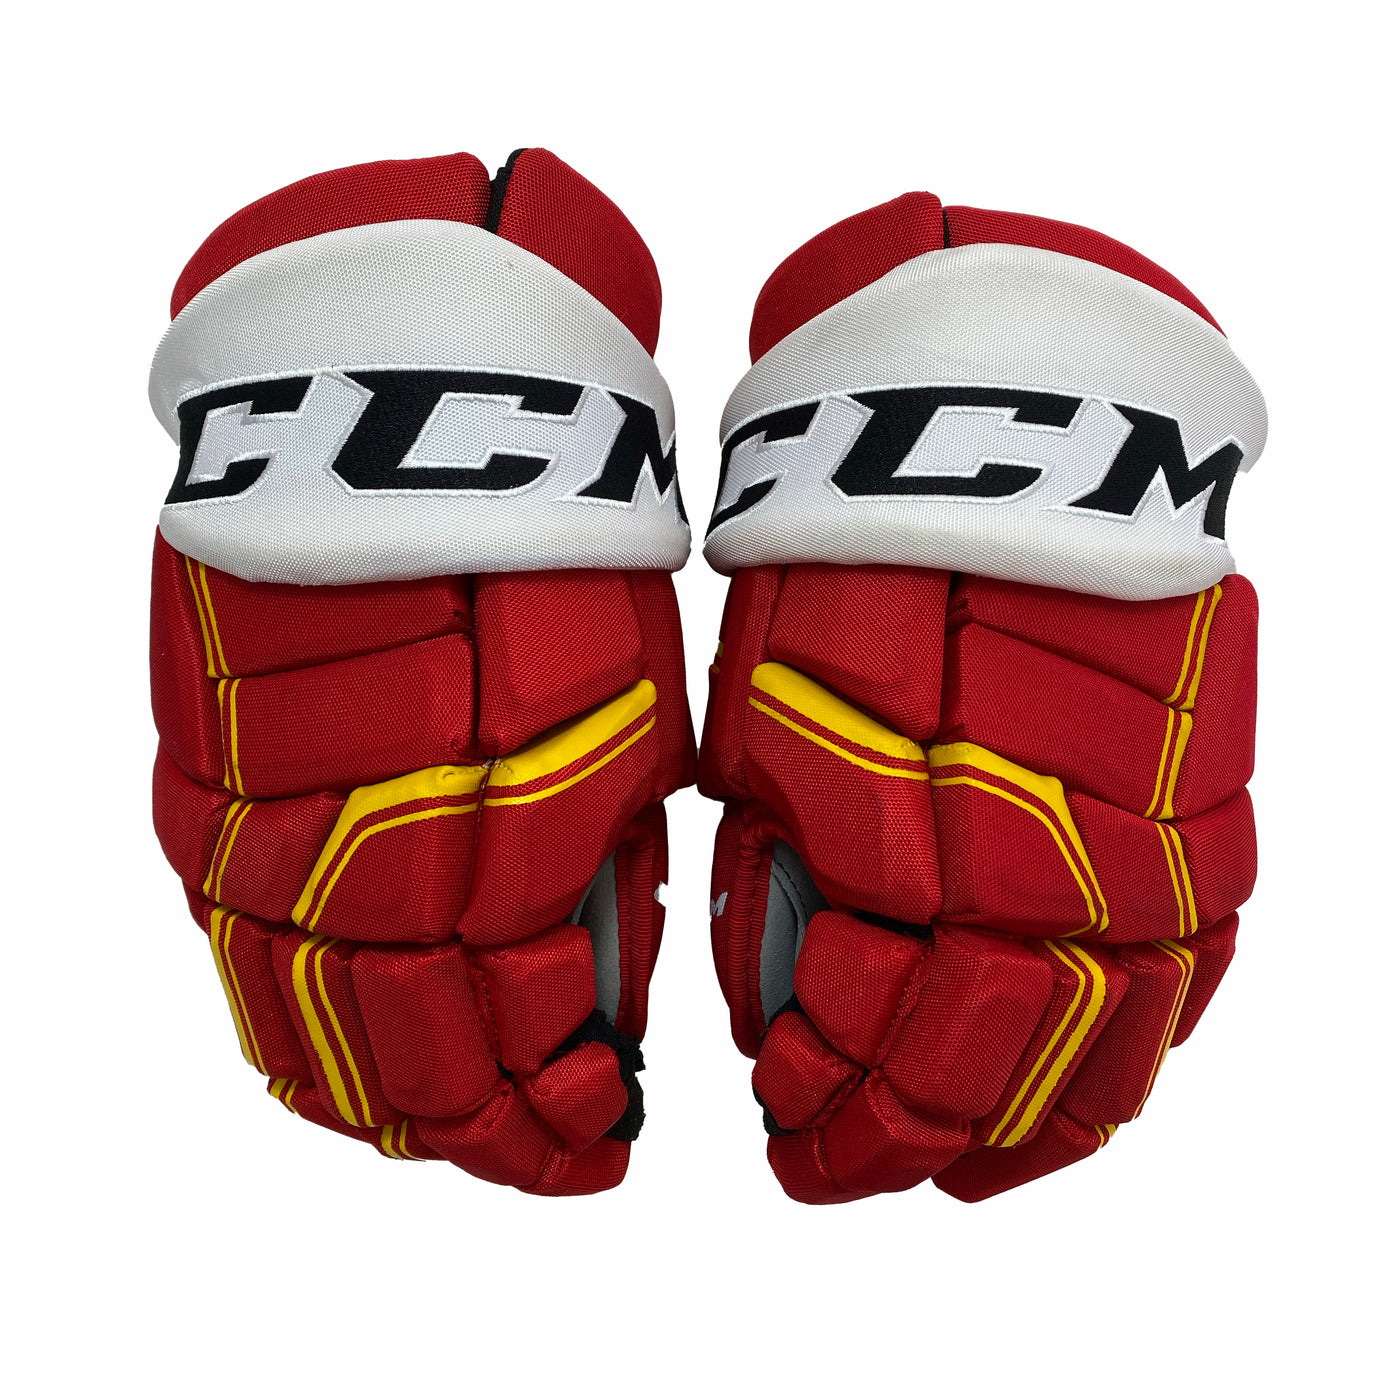 CCM HGQL - Calgary Flames - Pro Stock Glove - Team Issue